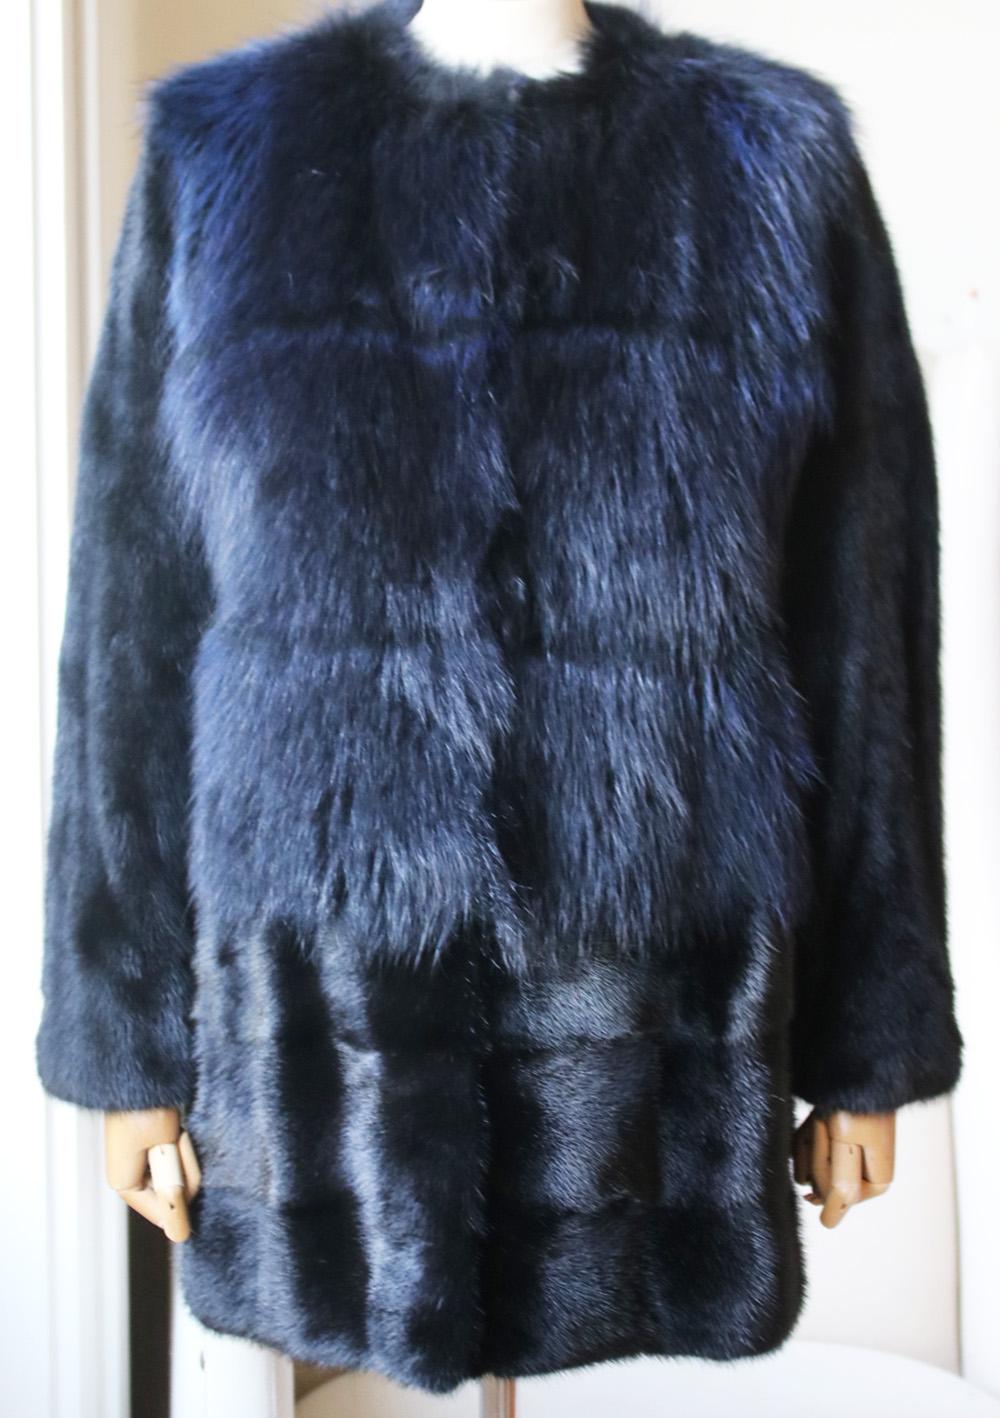 Barneys New York black mink and raccoon fur panelled coat. Black and blue mink and raccoon-fur. Hook fastening through front. 100% Dyed mink. 100% Dyed raccoon. Lining: 100% silk. Made in USA.

Size: Medium (UK 10, US 6, FR 38, IT 42)

Condition: As